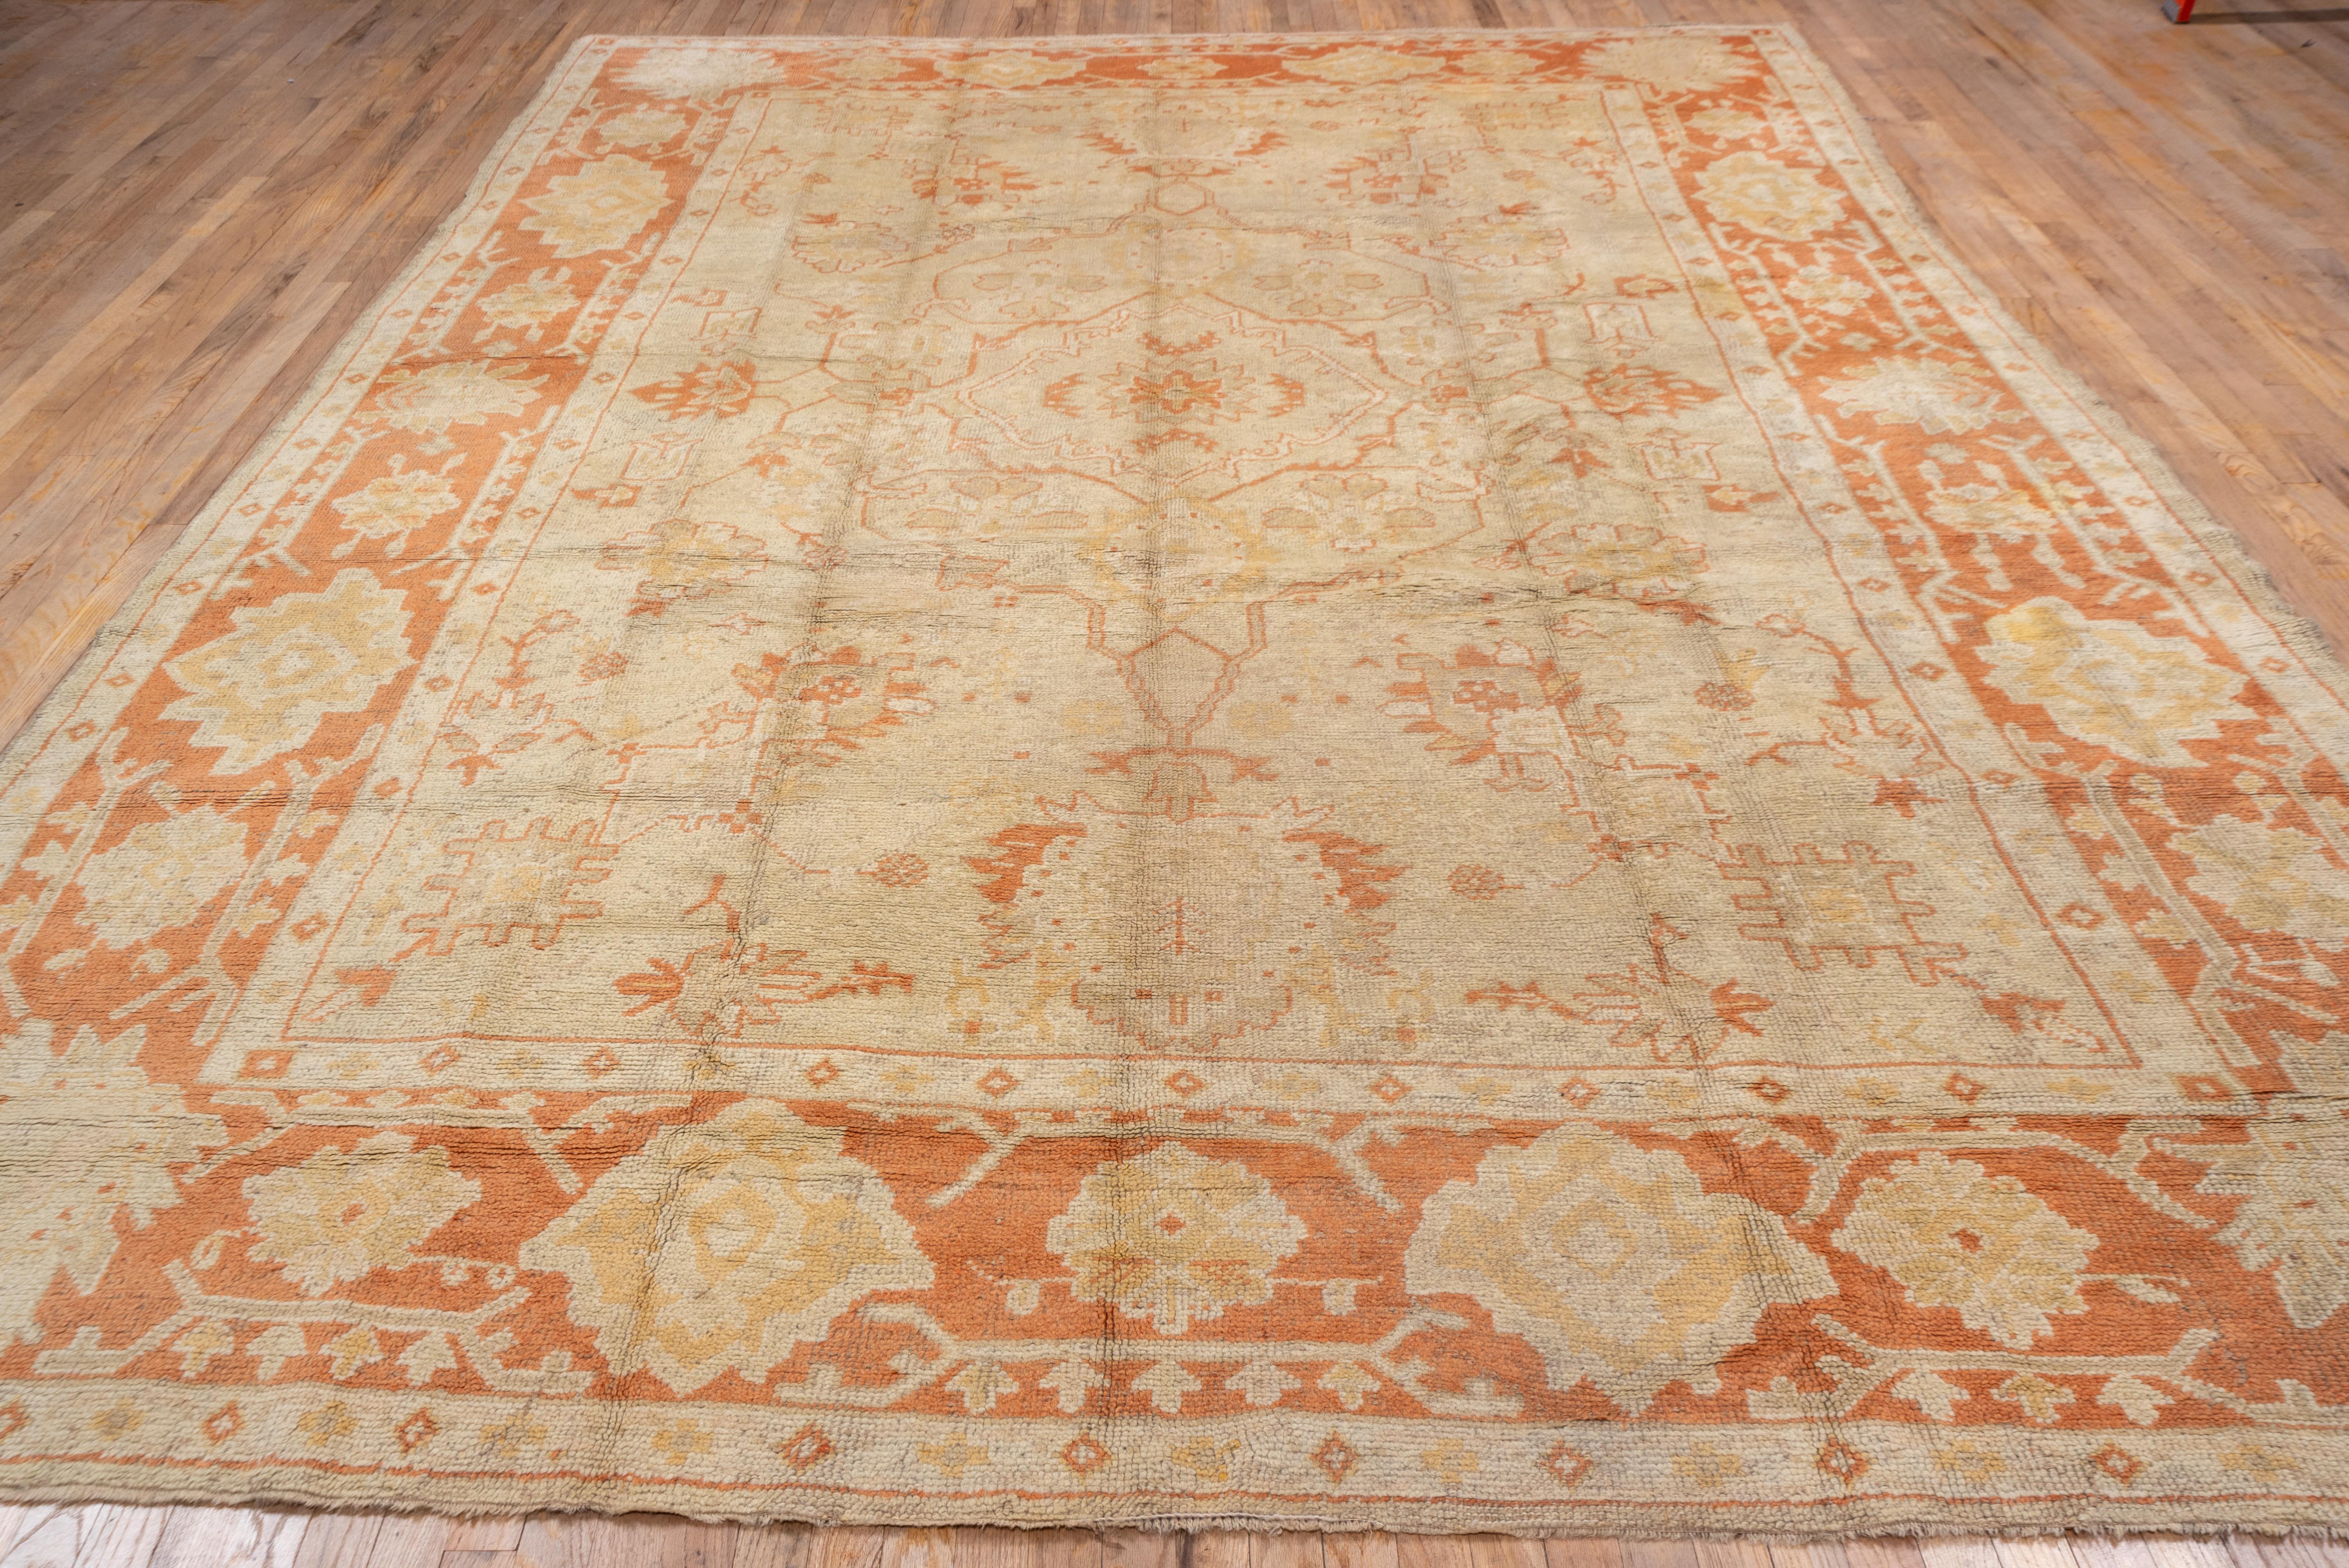 The definitive tangerine-rust border of this West Anatolian coarsely woven piece shows cartouches and corner ragged palmettes, and frames the sandy straw field with an outline octogramme medallion, with side pendant palmettes, accented overall in